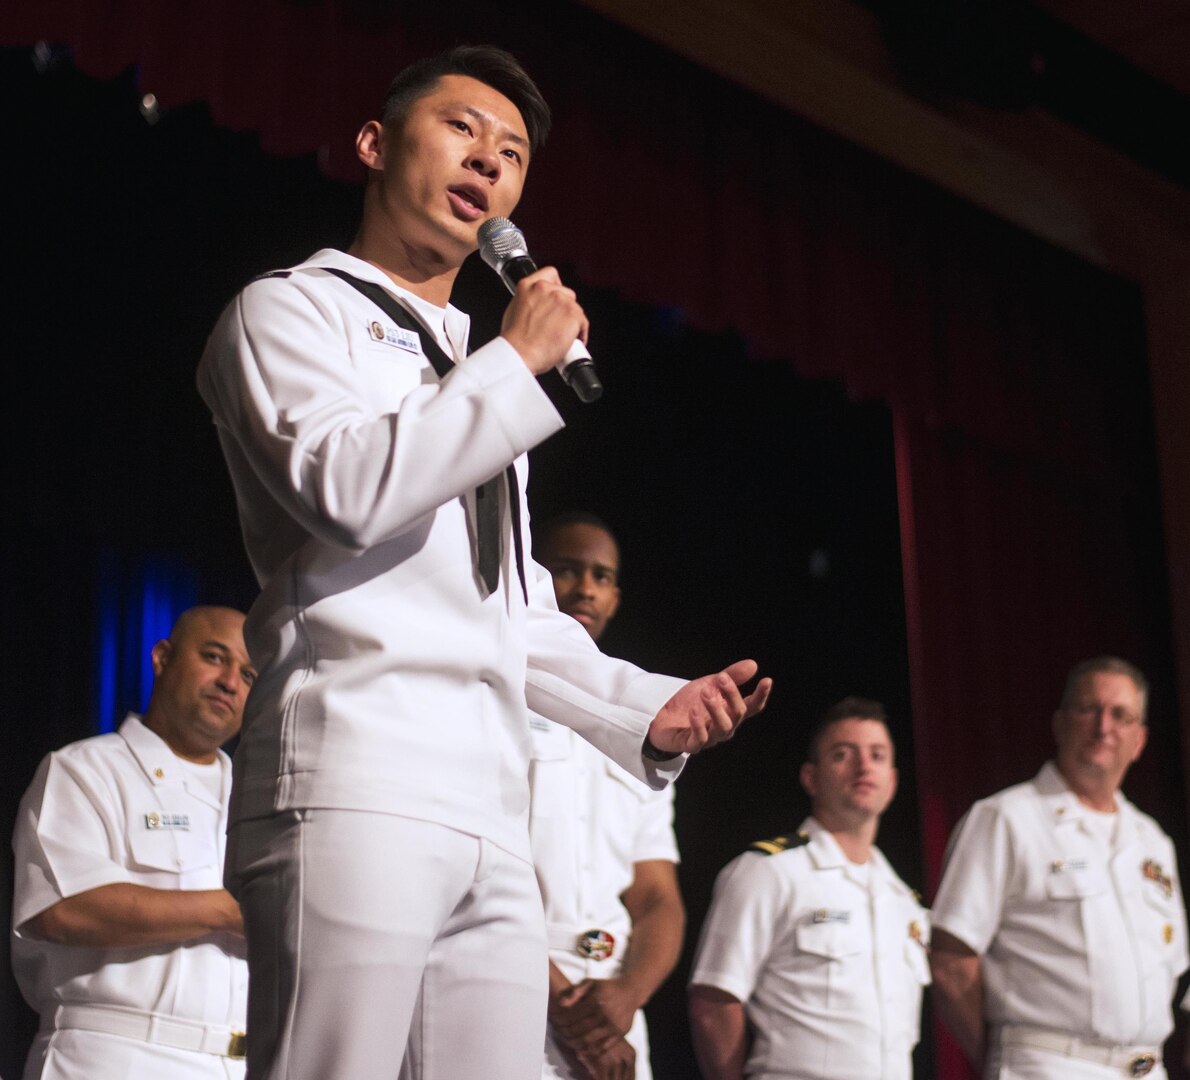 Petty Officer 3rd Class Sijia Liu, assigned to the amphibious transport dock ship USS San Antonio (LPD 17), speaks to students at Winston Churchill High School in San Antonio. Seven Sailors from the San Antonio, including the executive officer and the command master chief, are visiting their ship's namesake during Fiesta San Antonio.